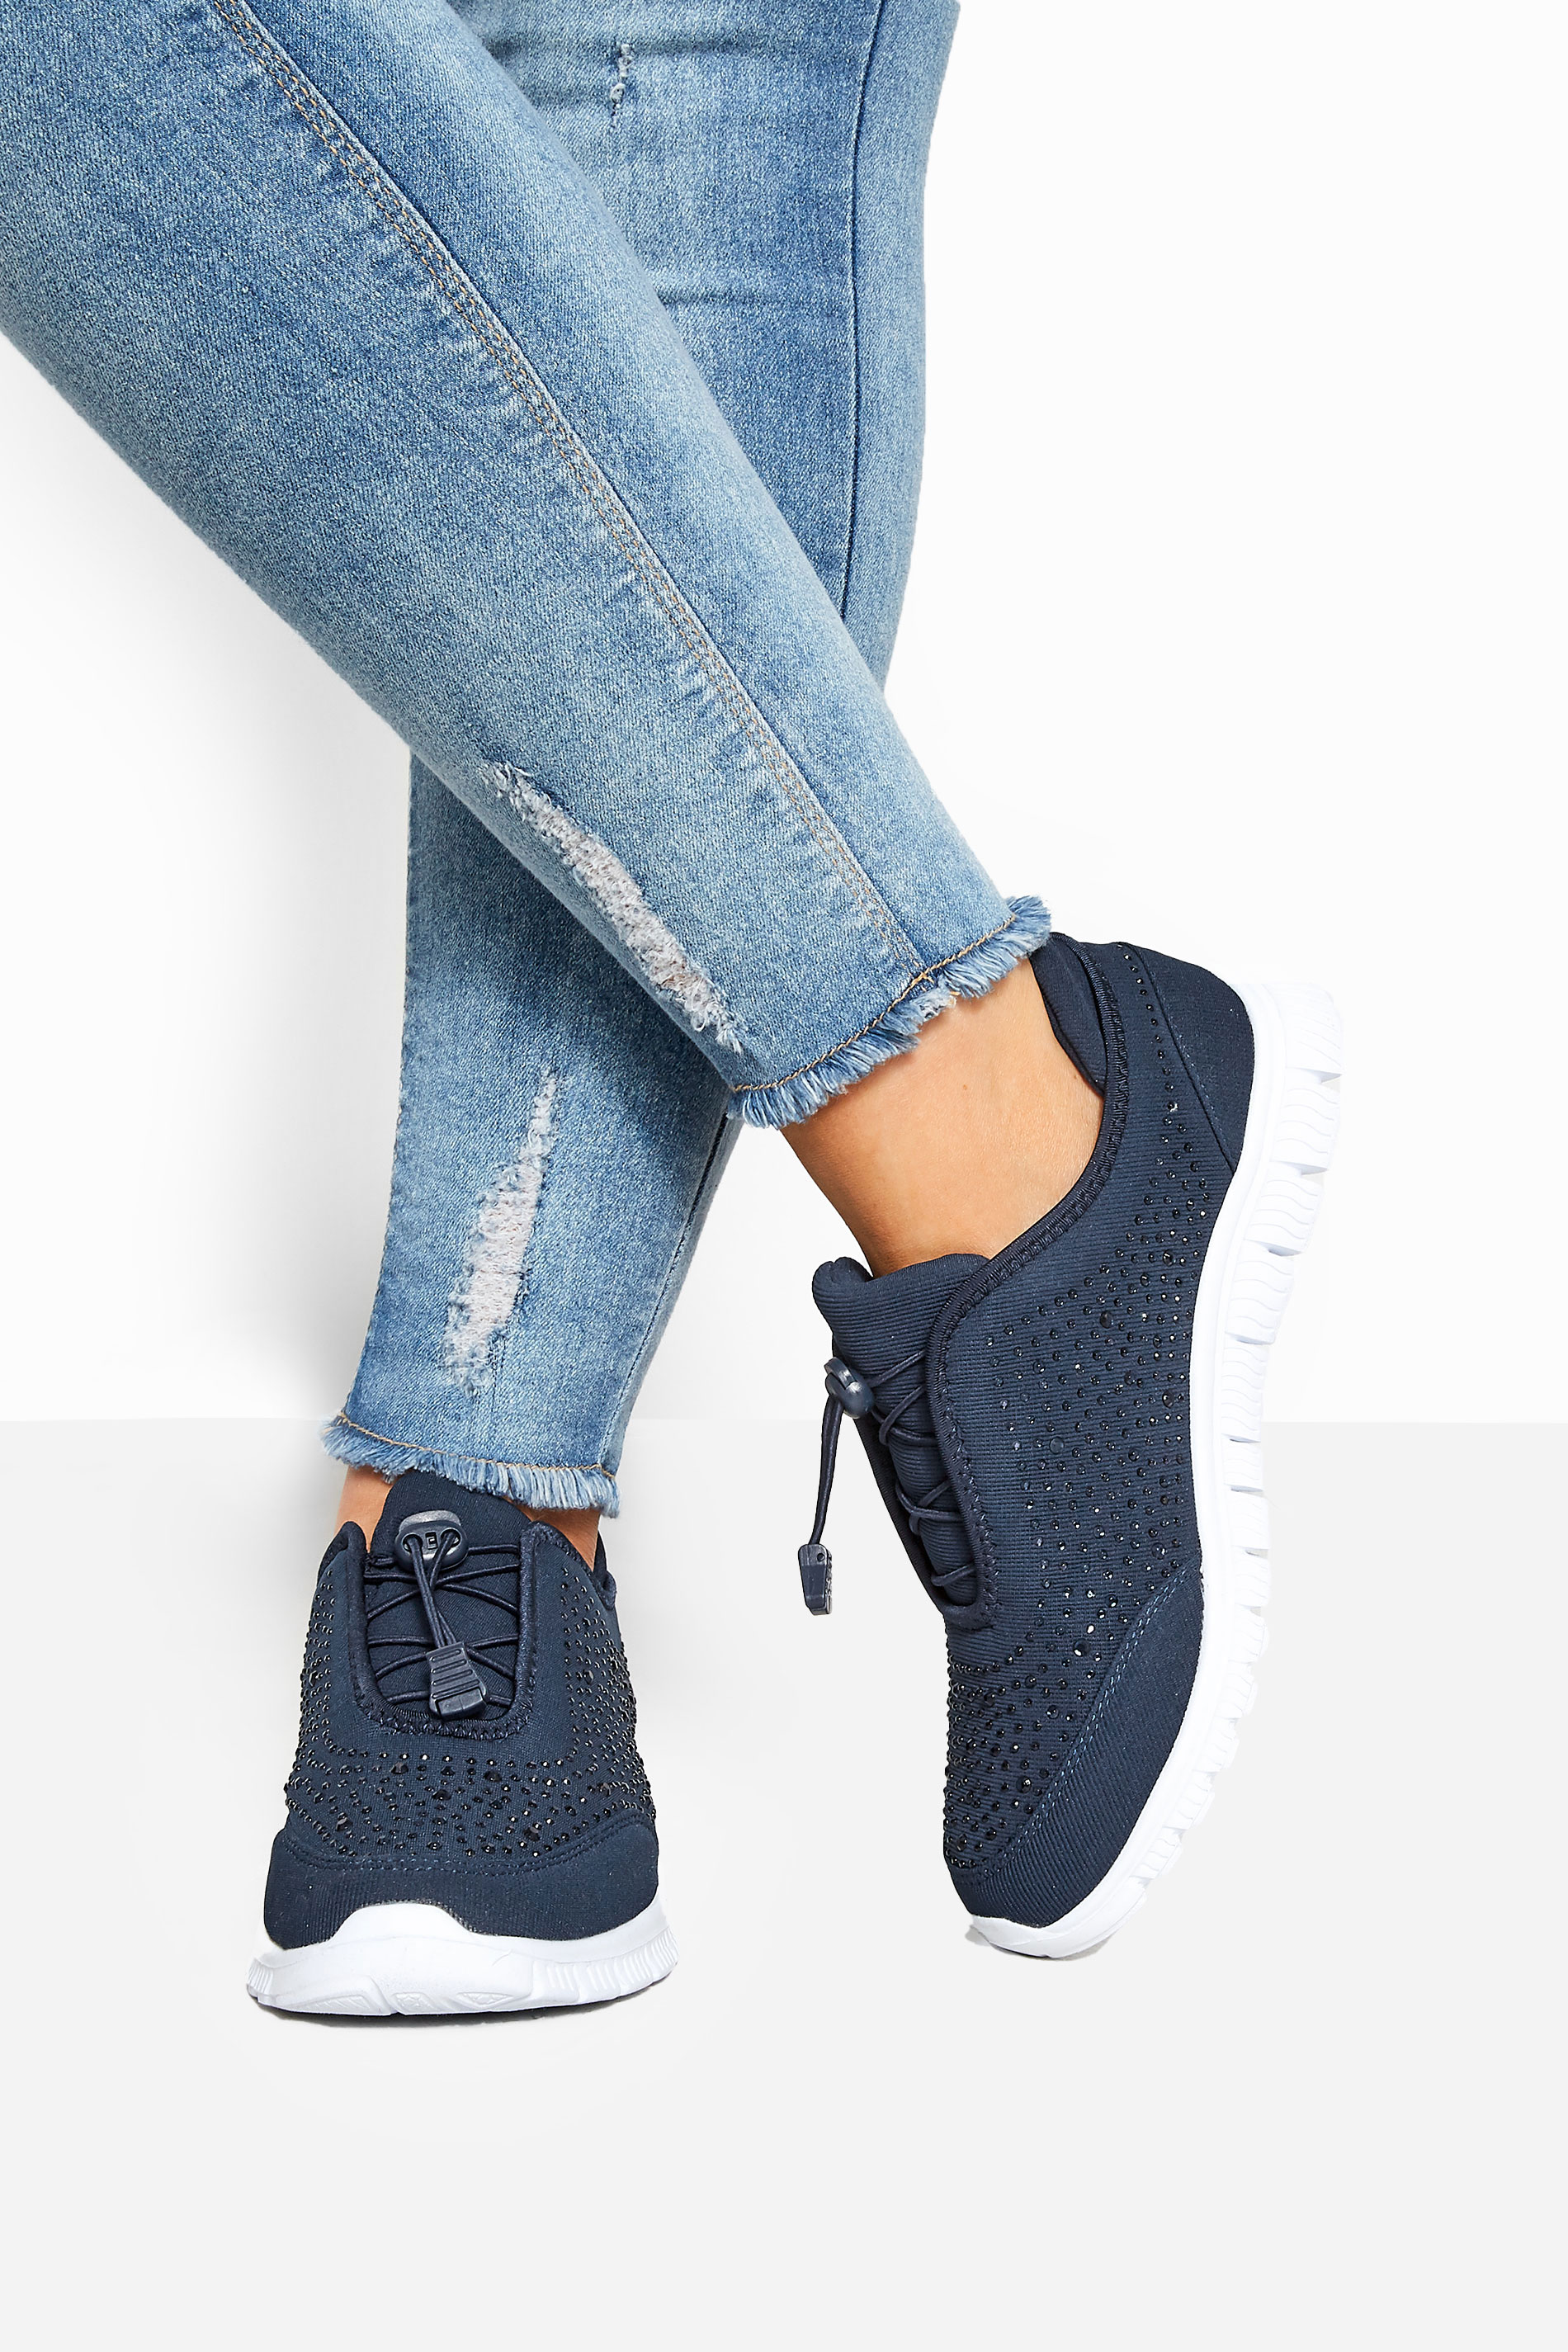 Navy Blue Embellished Trainers In Extra Wide EEE Fit_154290MODEL1.jpg